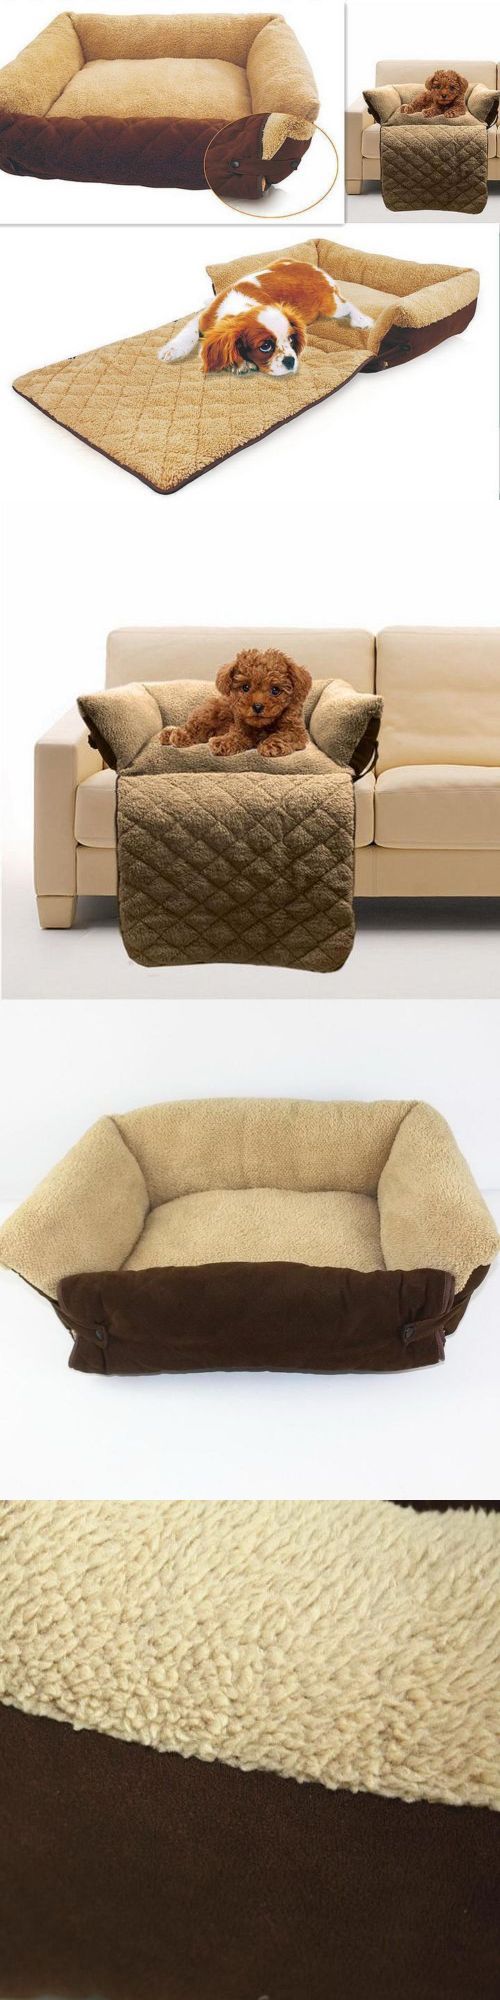 Dog/Cat Bed Soft Warm Pet Cushion Puppy Sofa  - Exclusively on #priceabate #priceabateAnimalsDog! BUY IT NOW ONLY $